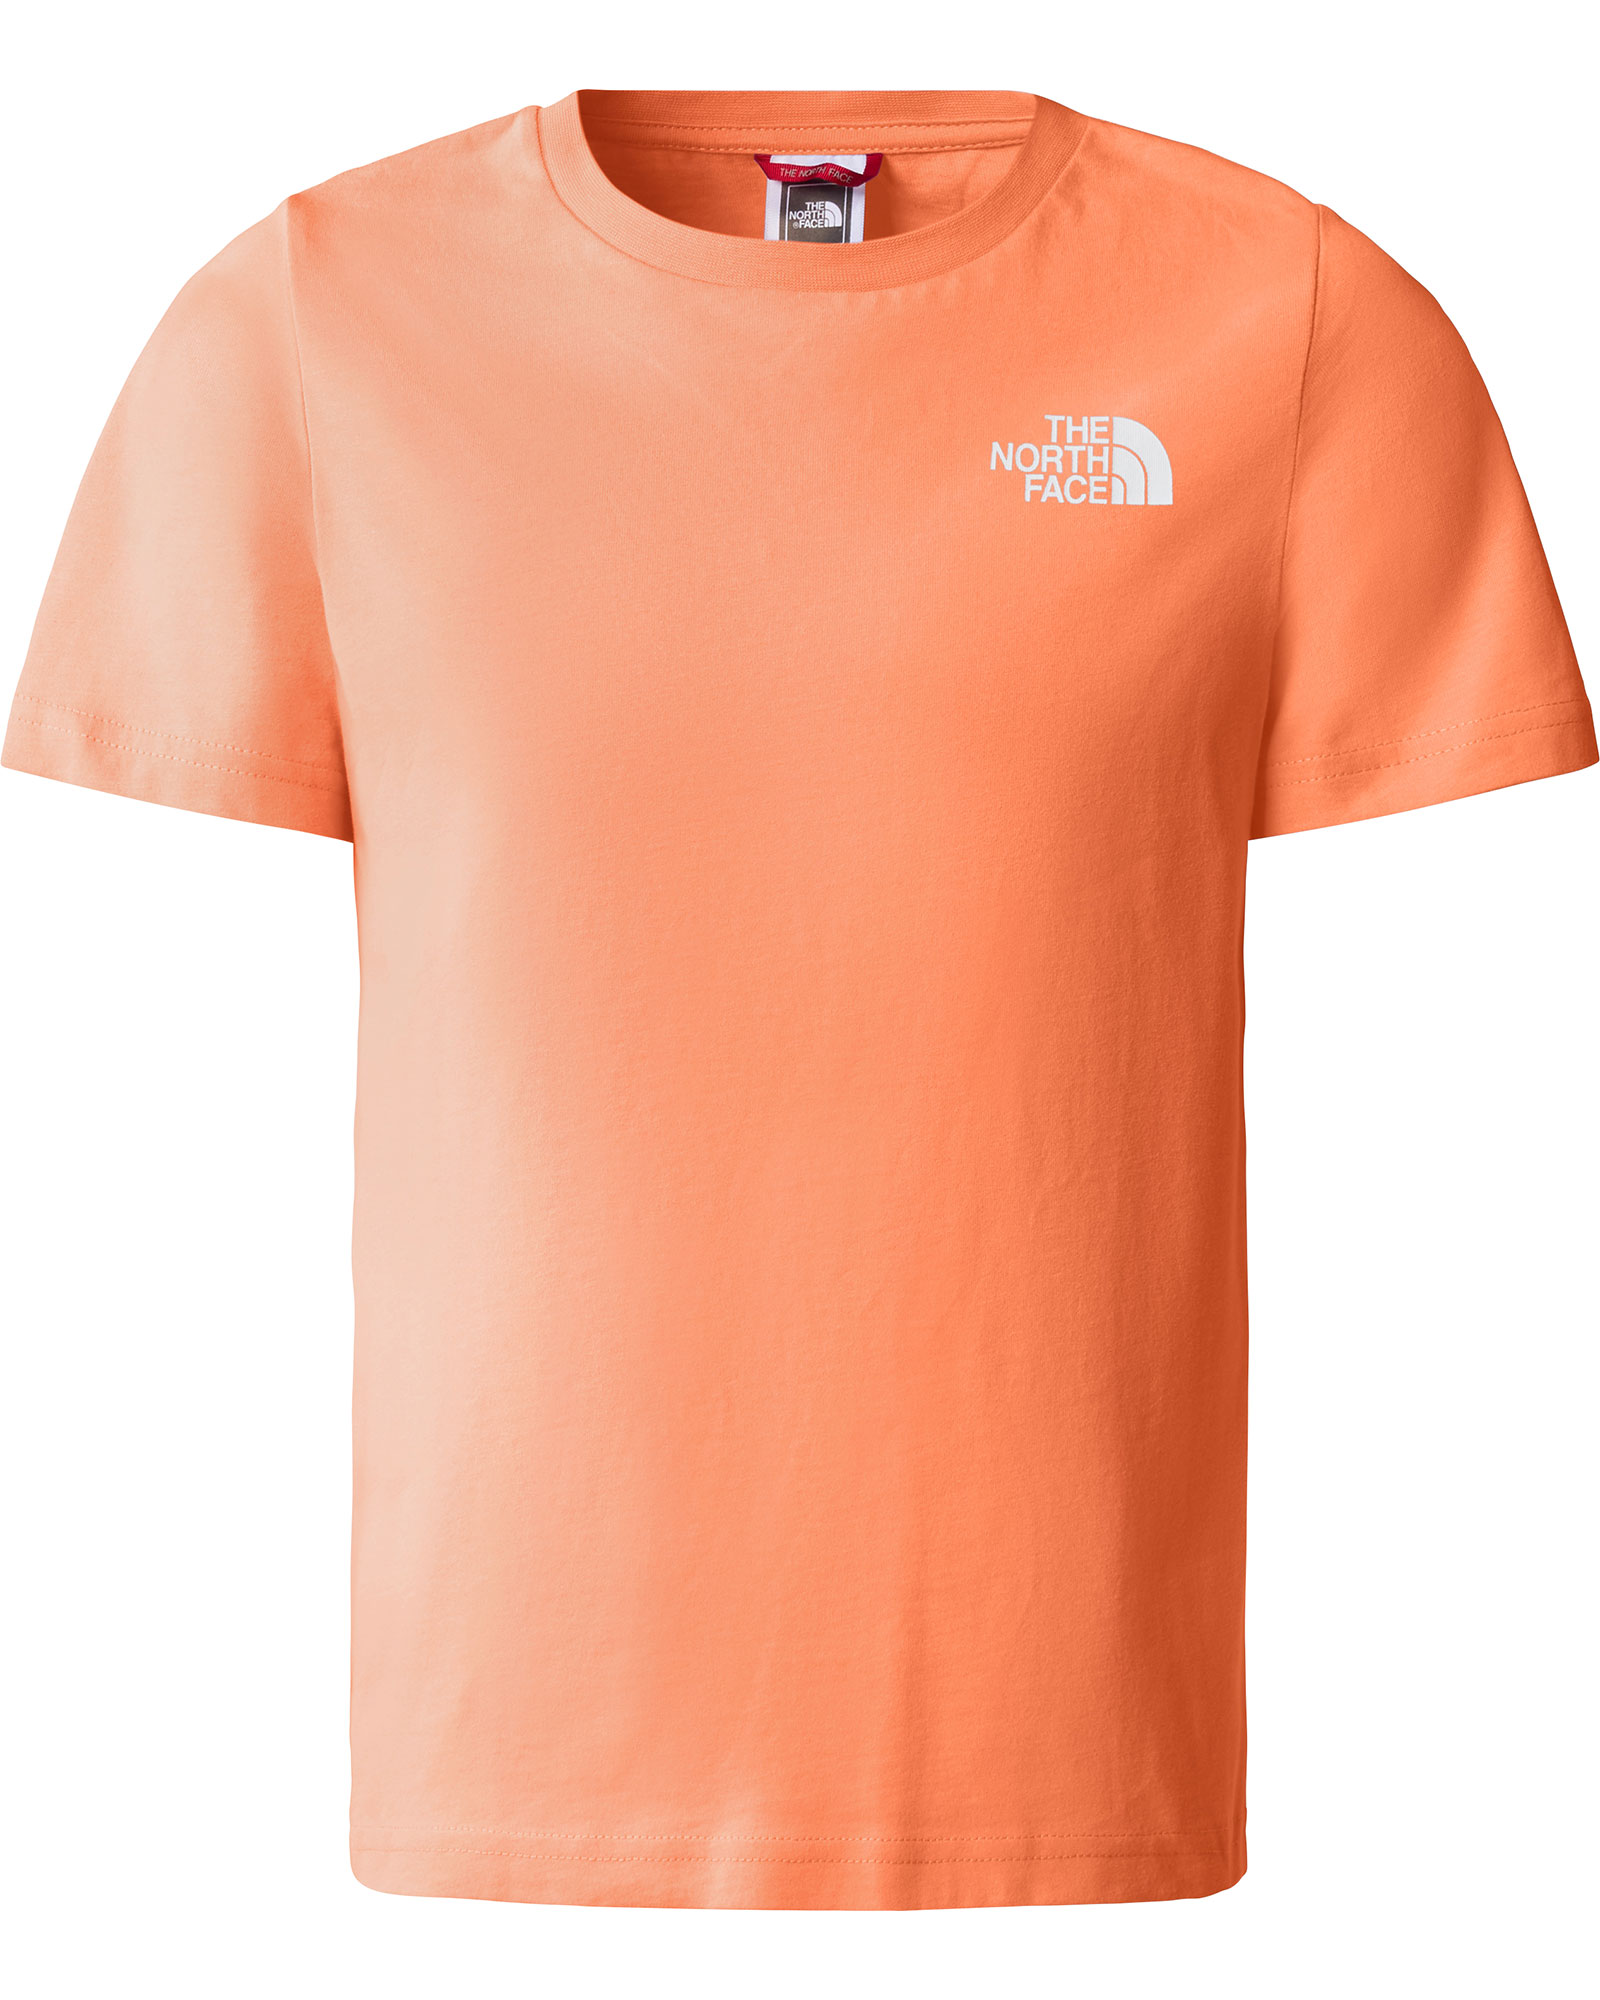 The North Face Girl’s Relaxed Redbox T Shirt - Dusty Coral Orange M